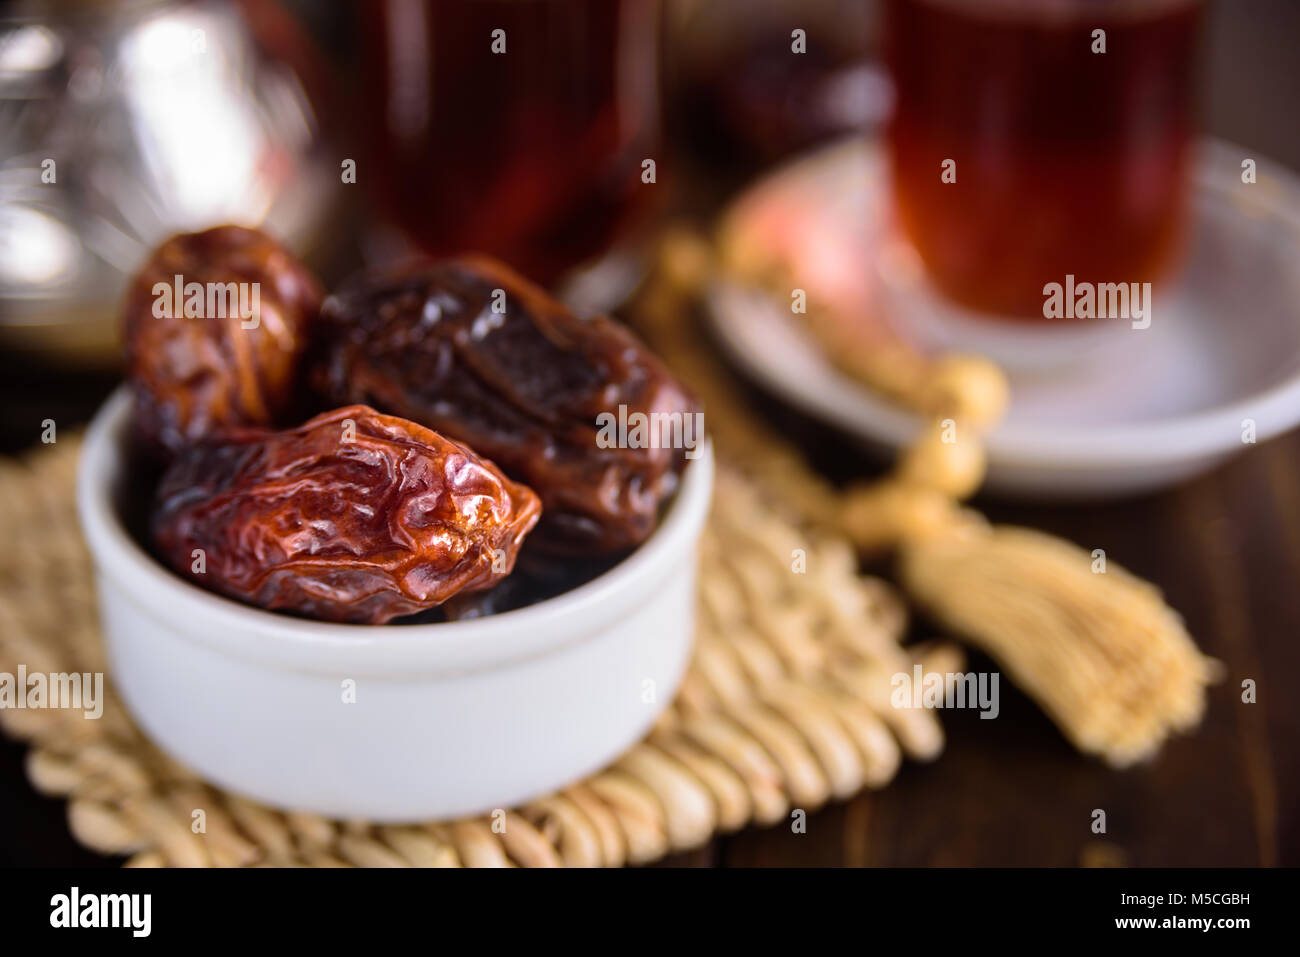 Date friuts and tea for iftar. Prayer beads Stock Photo